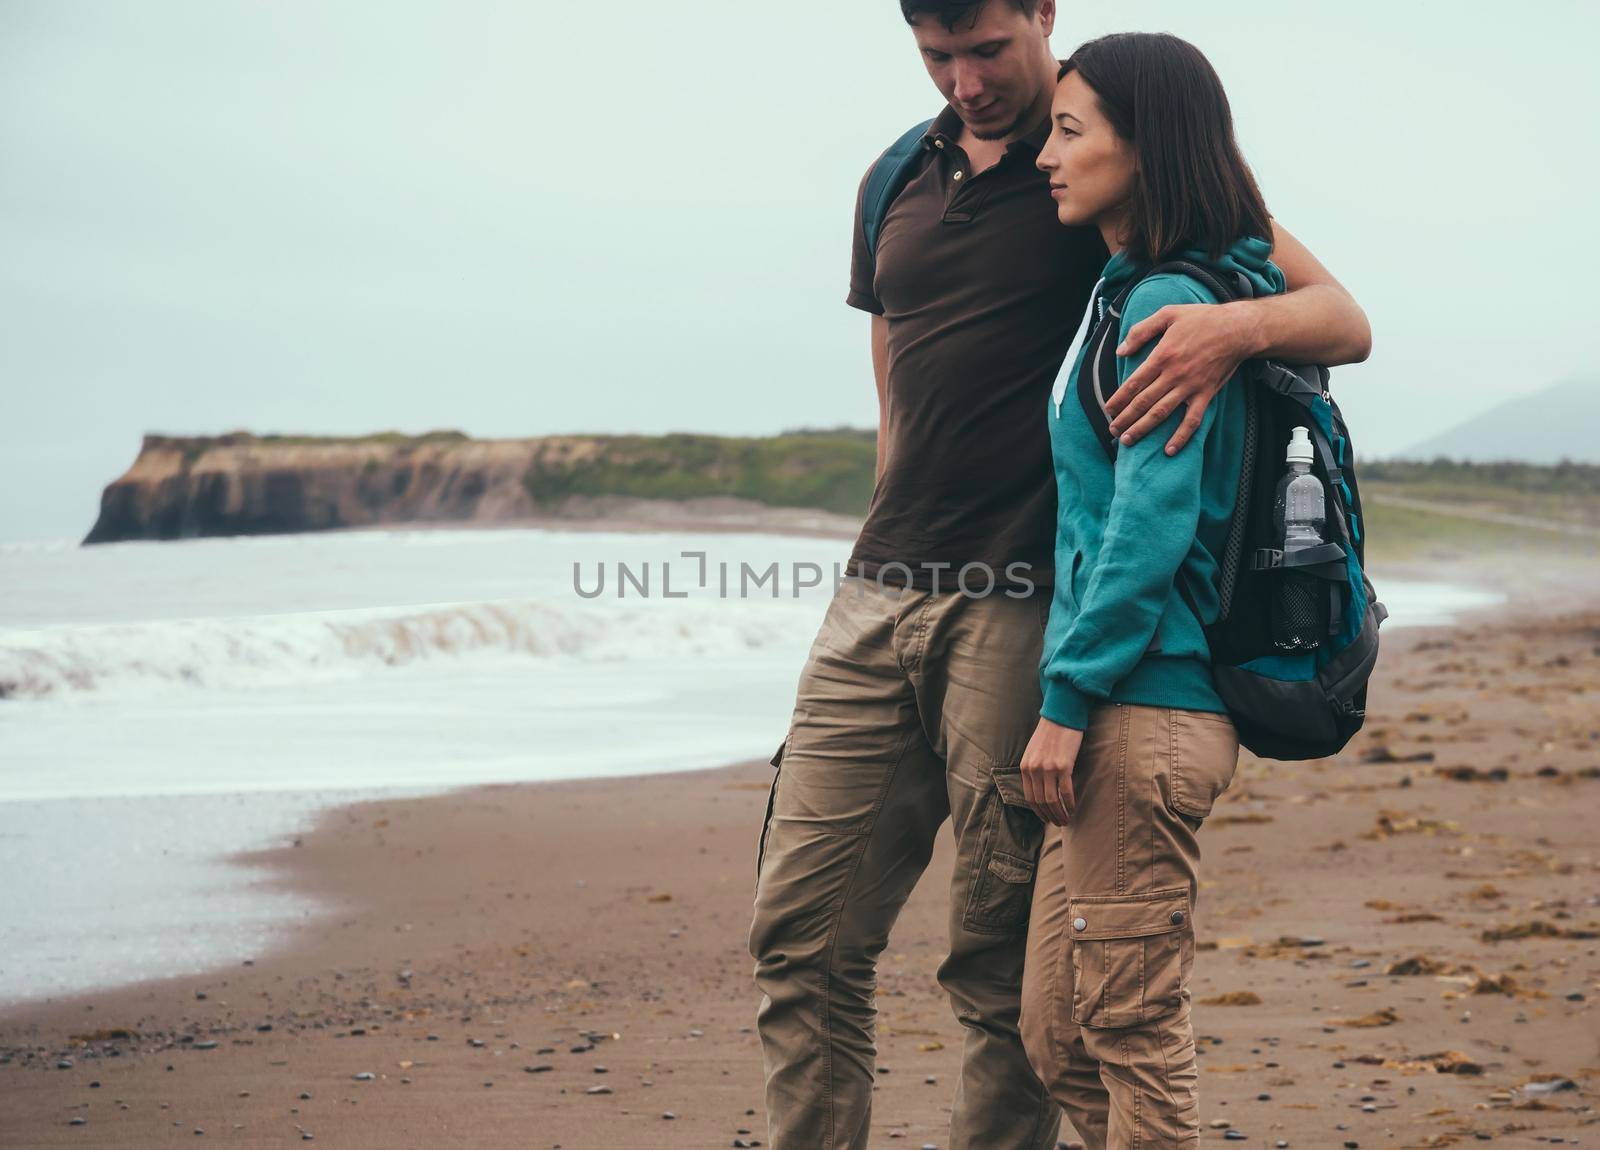 Traveler couple in love with backpacks walking on beach near the sea in summer. Man embracing a woman